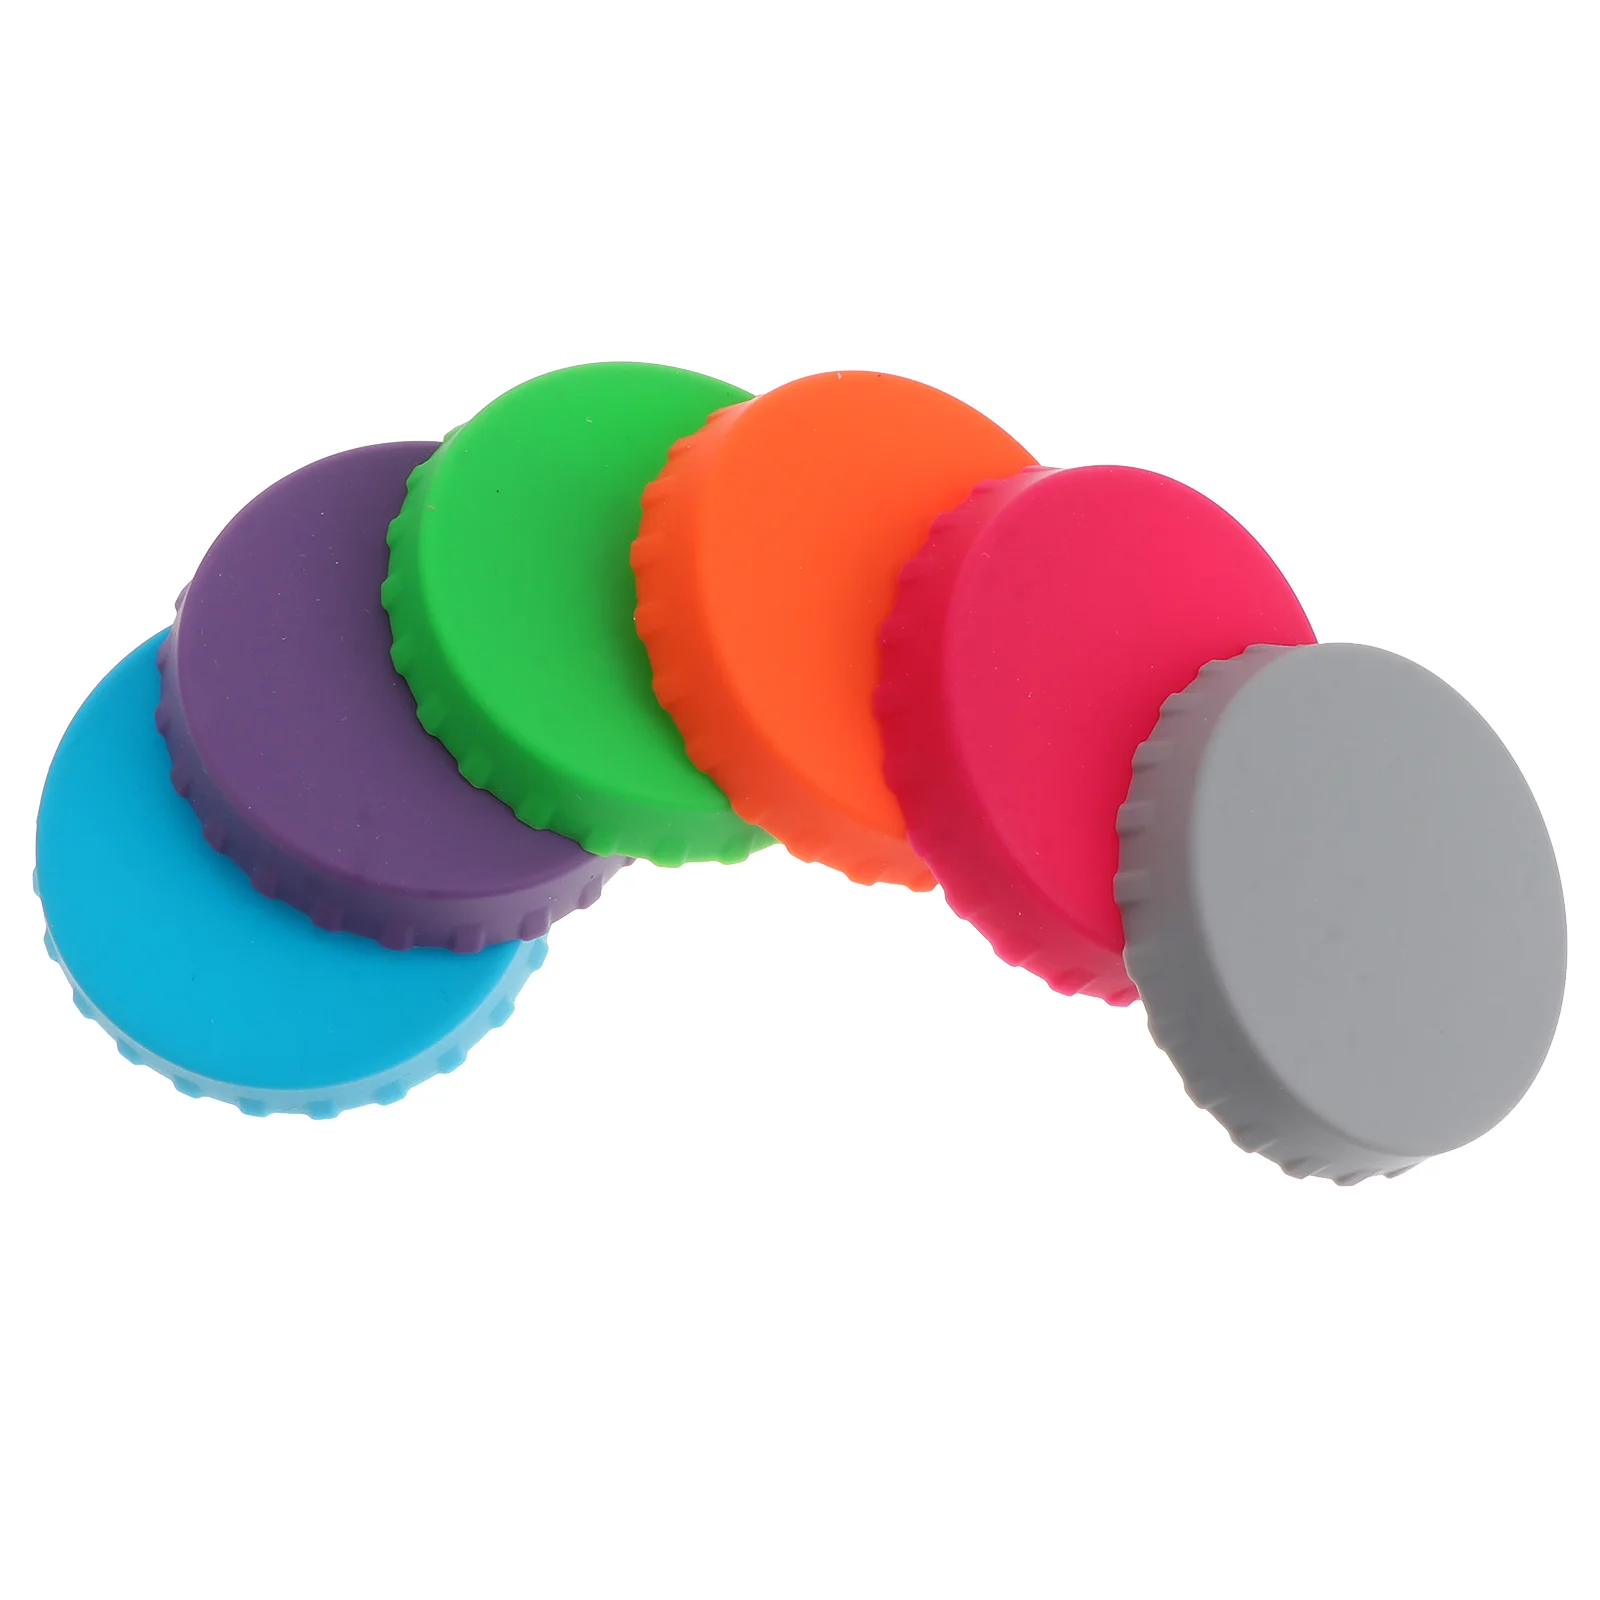 

Can Soda Lids Lid Covers Silicone Beverage Caps Cover Beer Bottle Protector Drink Saver Cans Topper Sealing Stopper Or Mouth